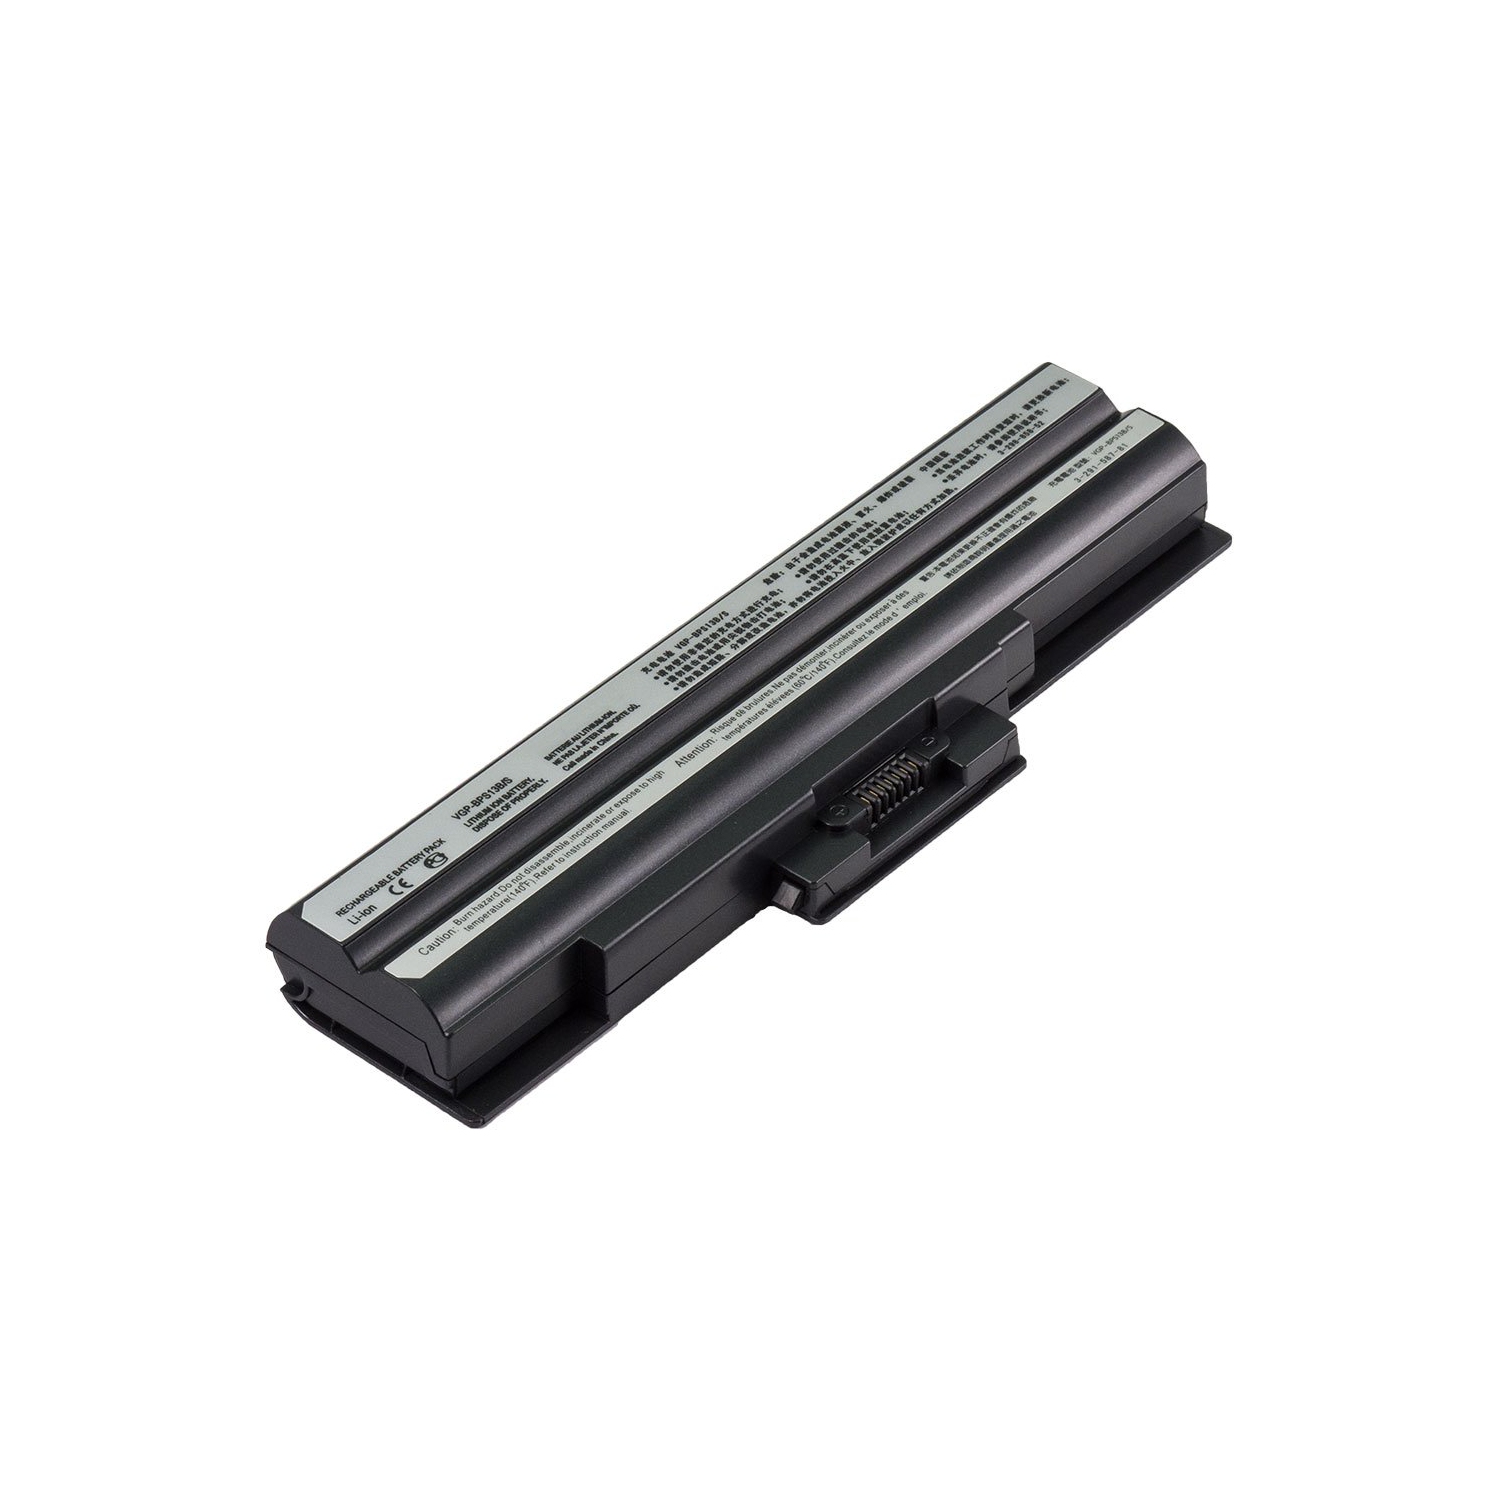 Laptop Battery Replacement for Sony VAIO VGN-AW190N, VGP-BPS13, VGP-BPS13/S, VGP-BPS13A/Q, VGP-BPS13B/B, VGP-BSP13/S